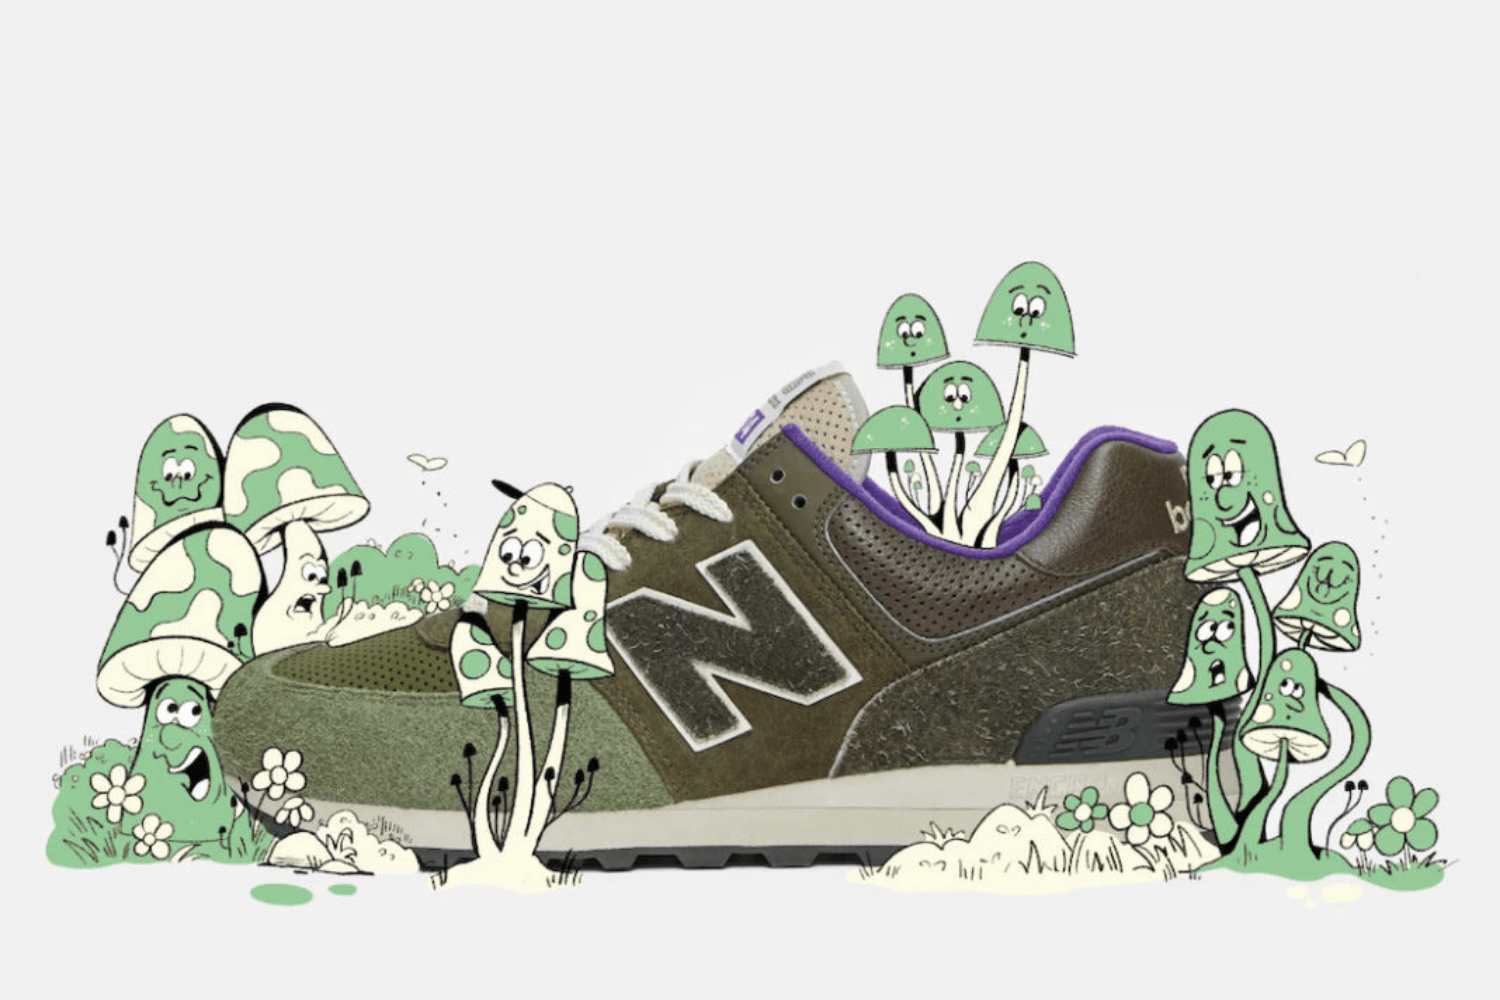 The Sneakersnstuff x New Balance 574 is coming